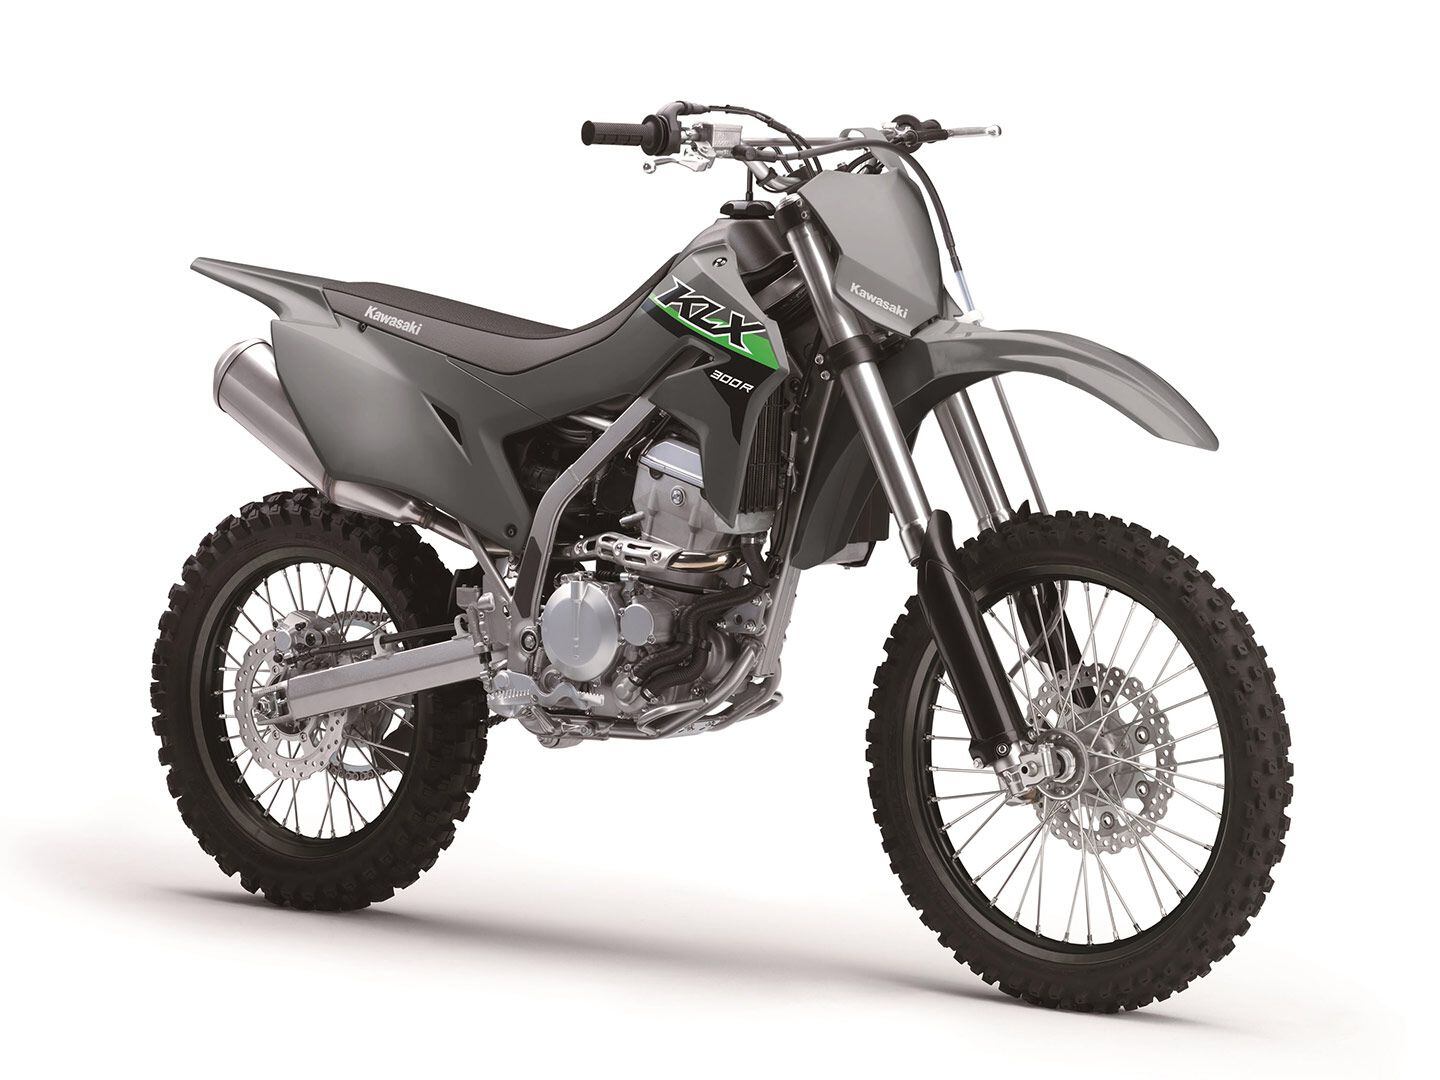 The latest KLX300R is now offered in a new Battle Gray.